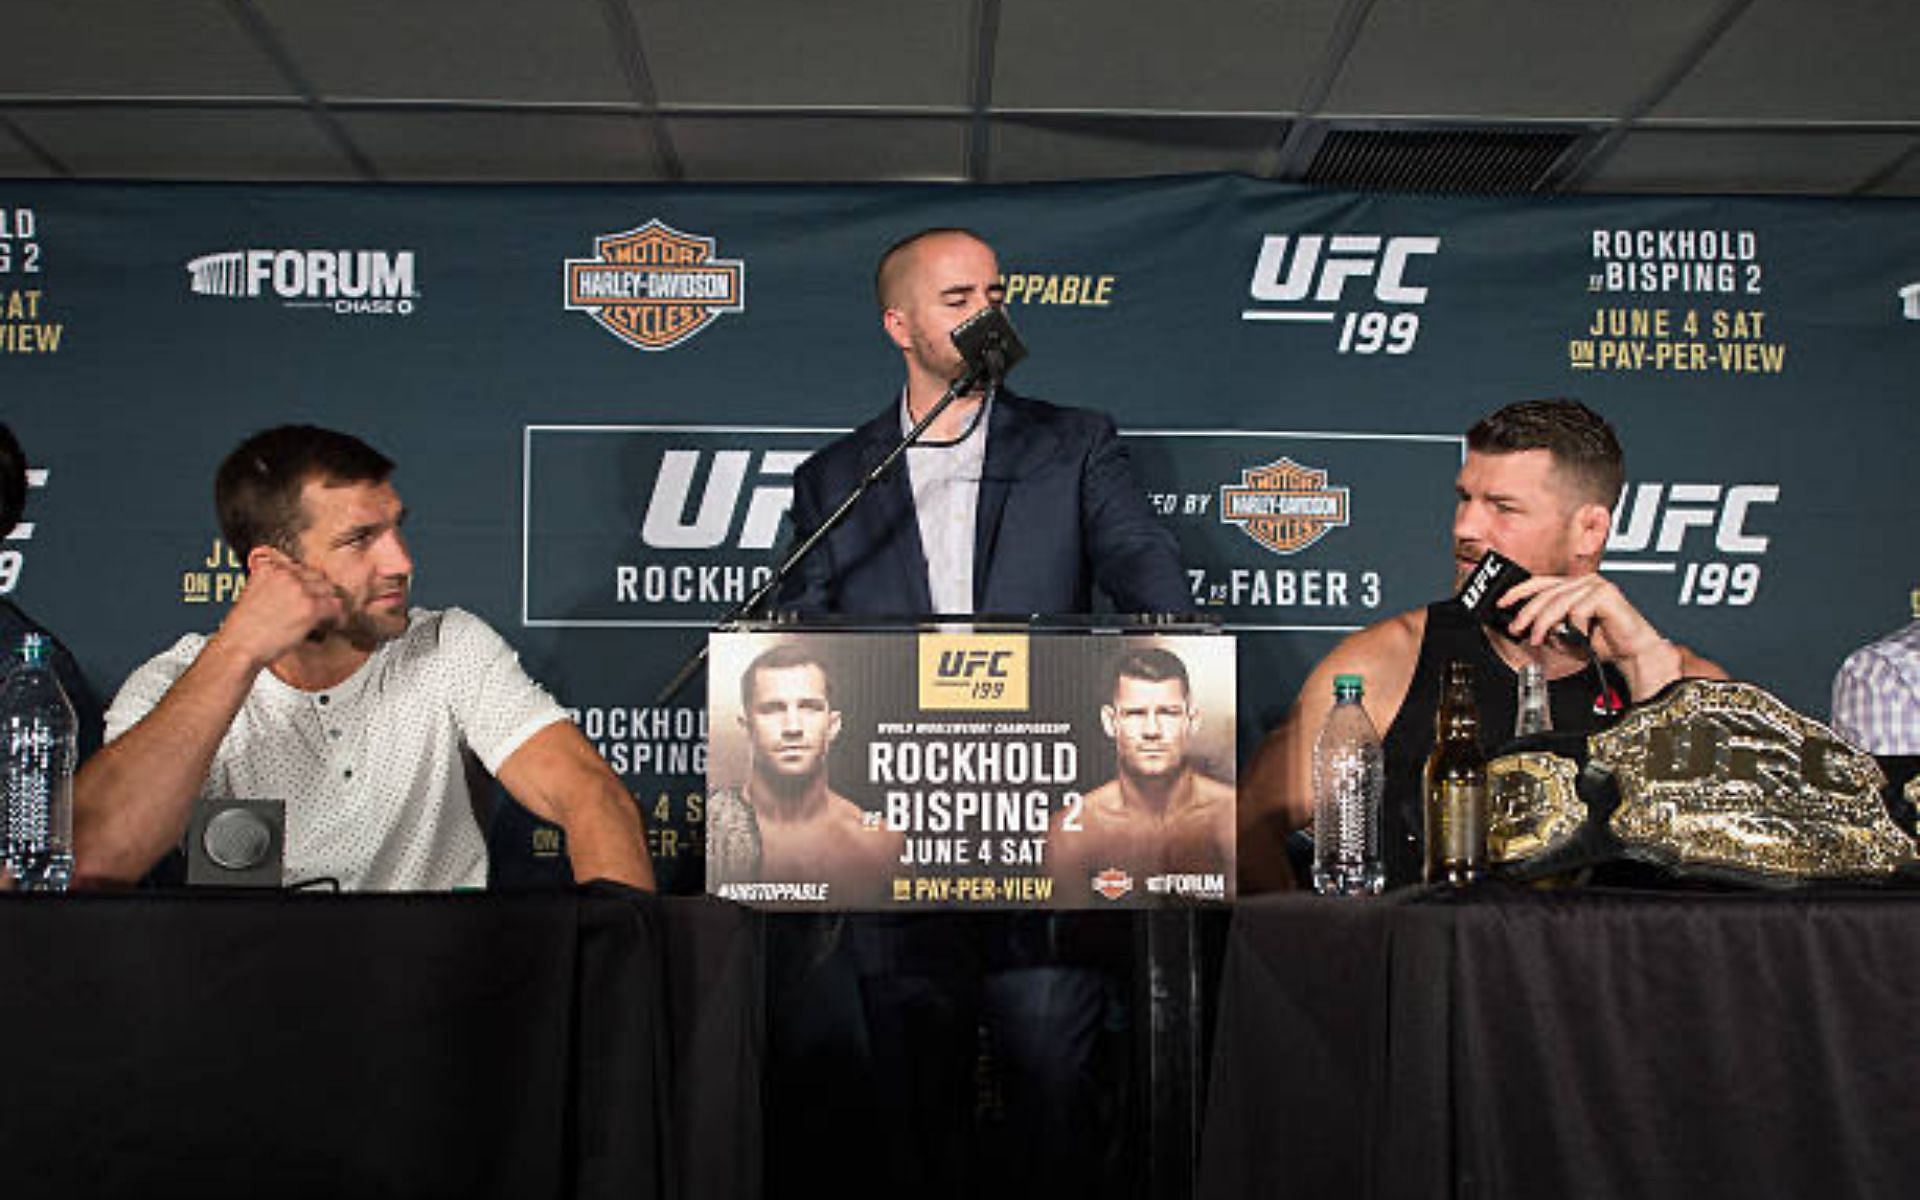 Luke Rockhold (L) and Michael Bisping (R) [ Image Courtesy: Getty]